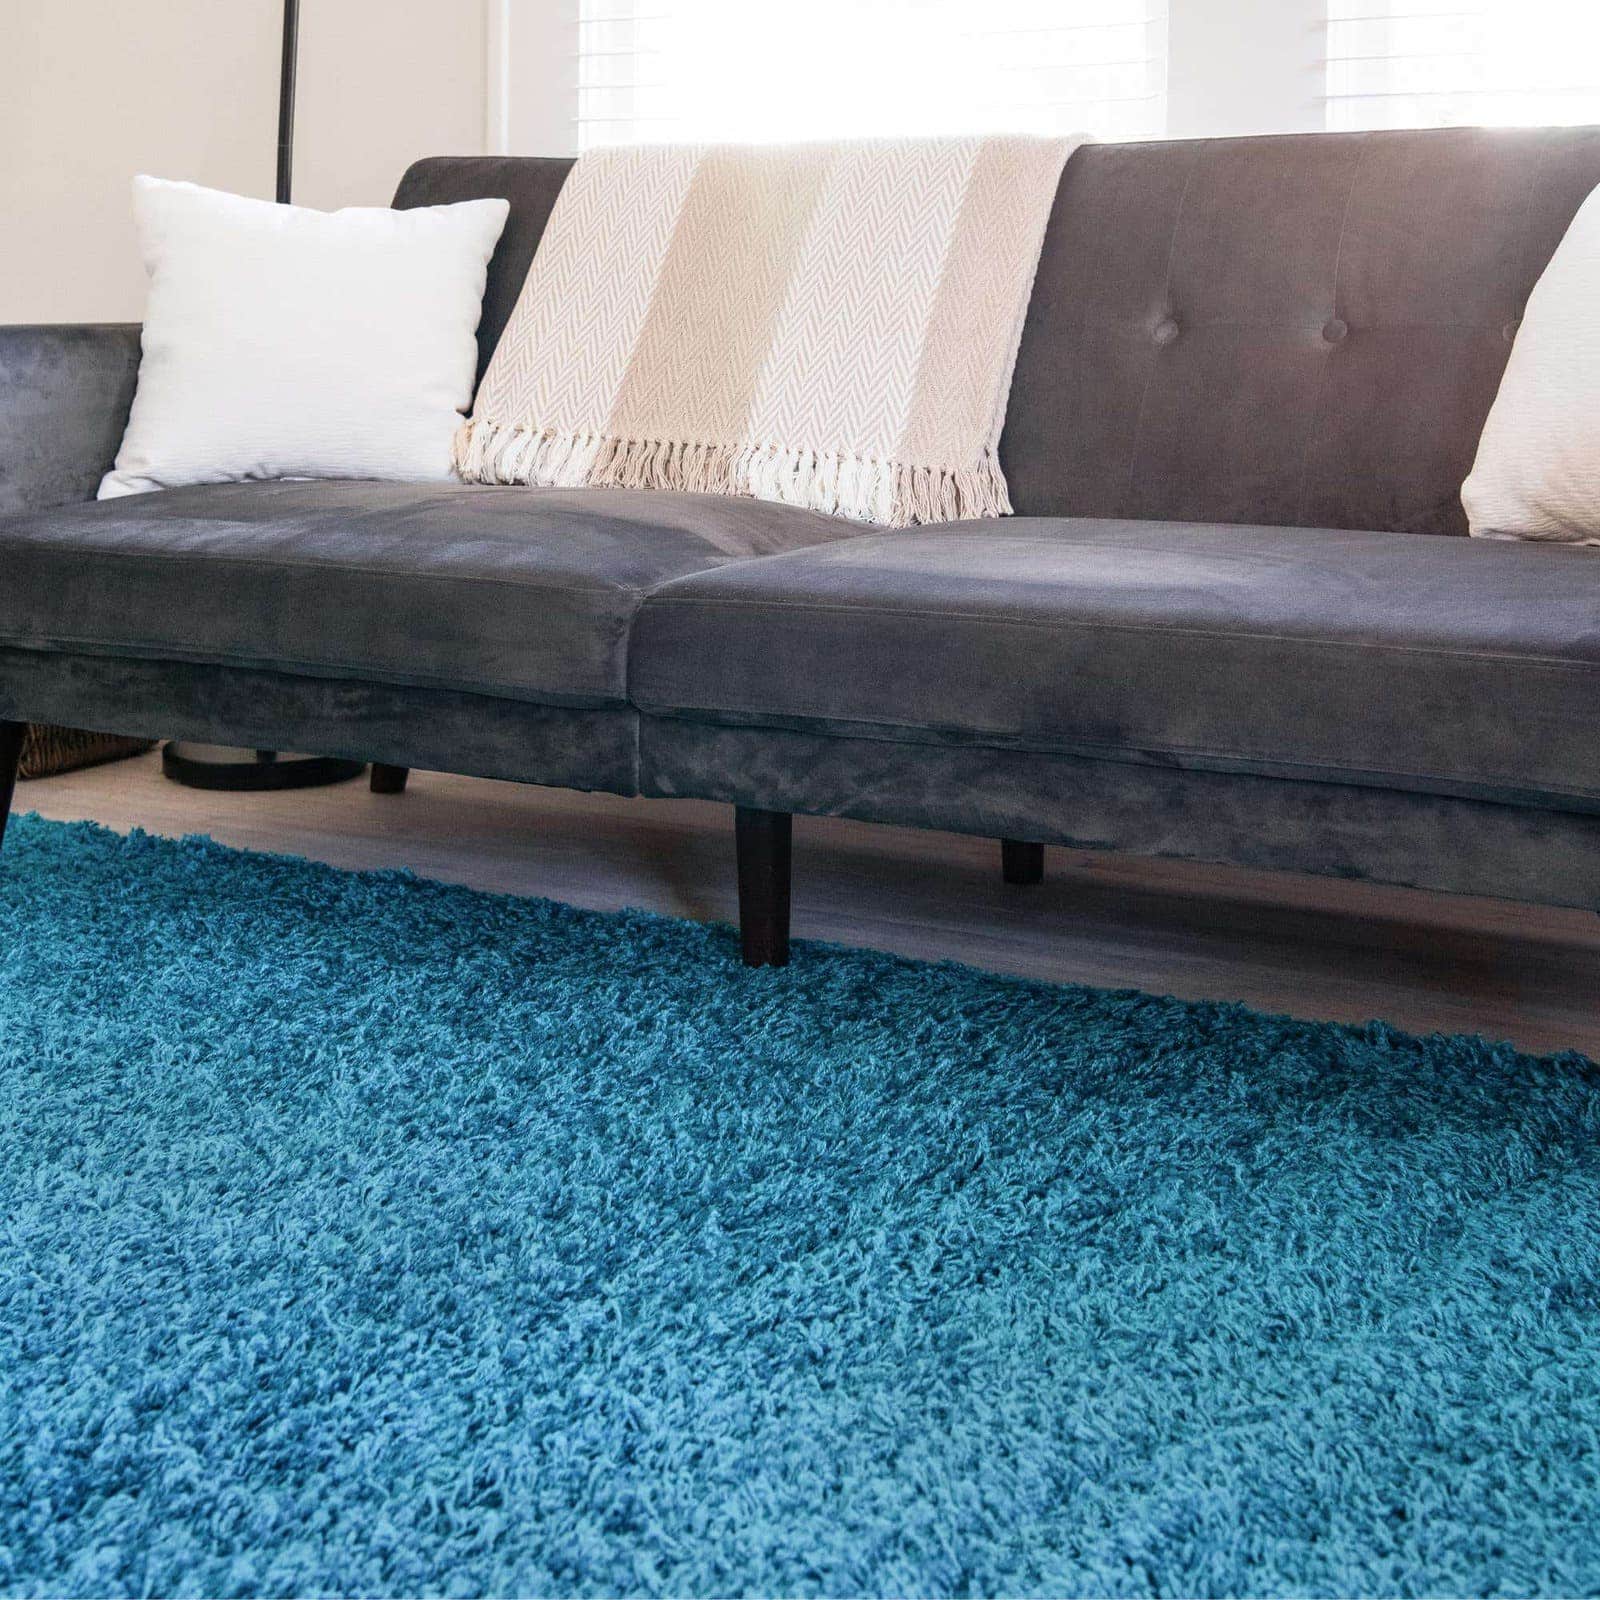 Scoop Up a Solid Shag to Use with a Retro Sofa